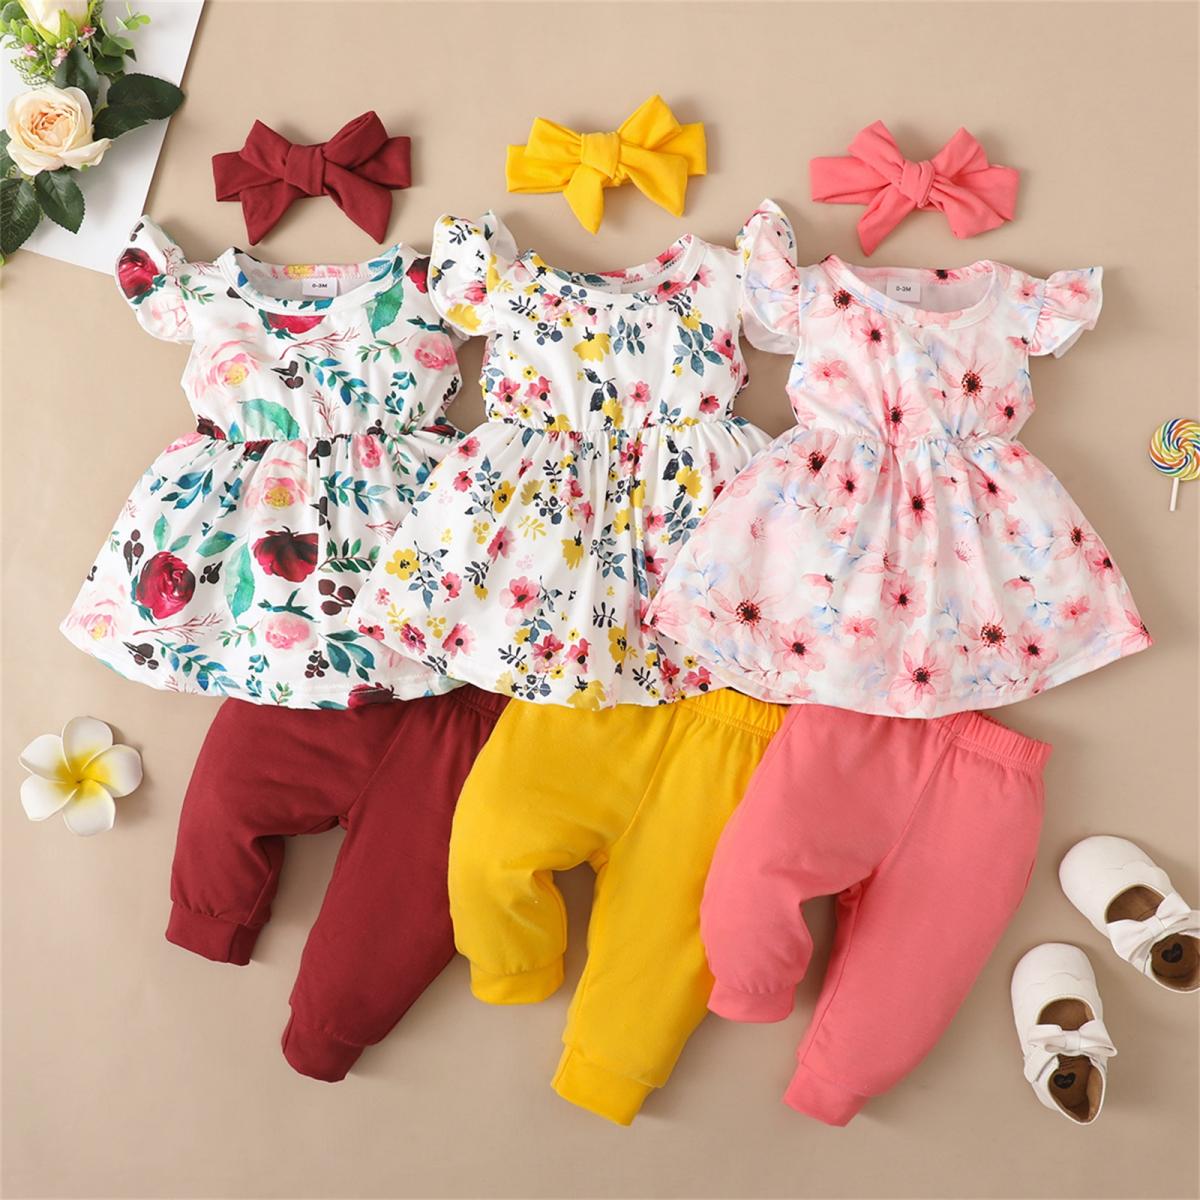 Sunsiom Baby Girls Clothes Fashion Summer Outfits Red Sleeveless